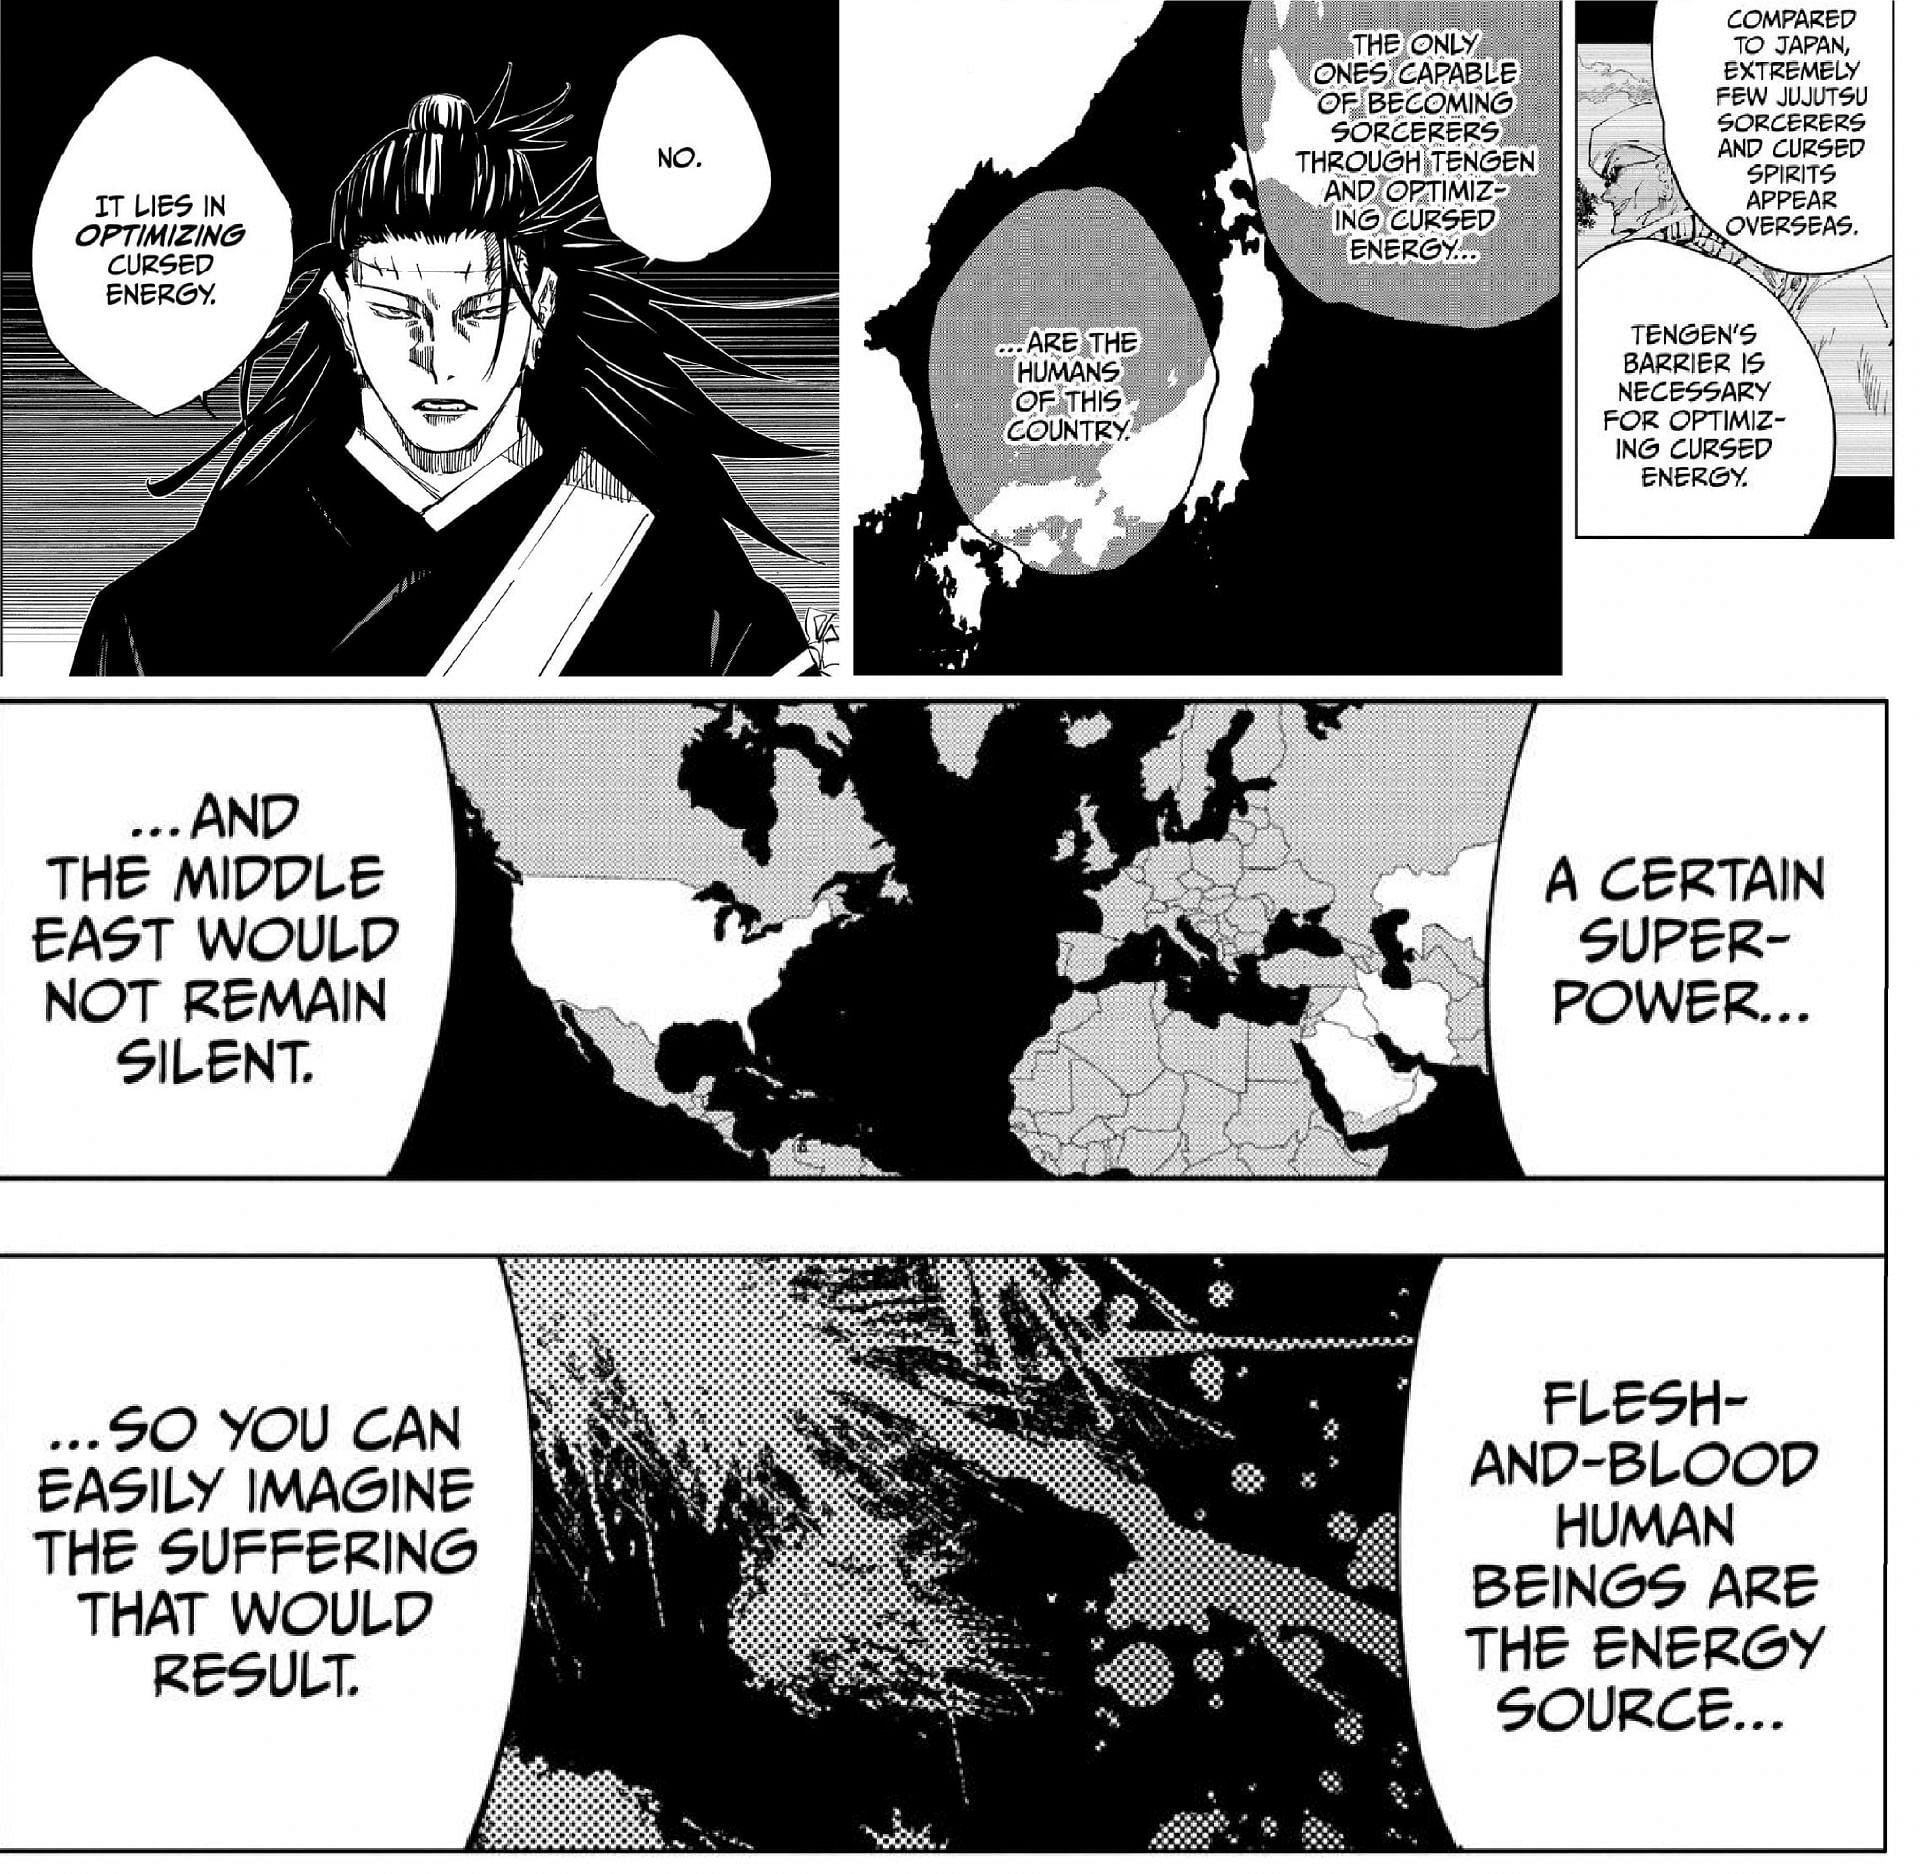 Jujutsu Kaisen What Is Cursed Energy Explained 5554